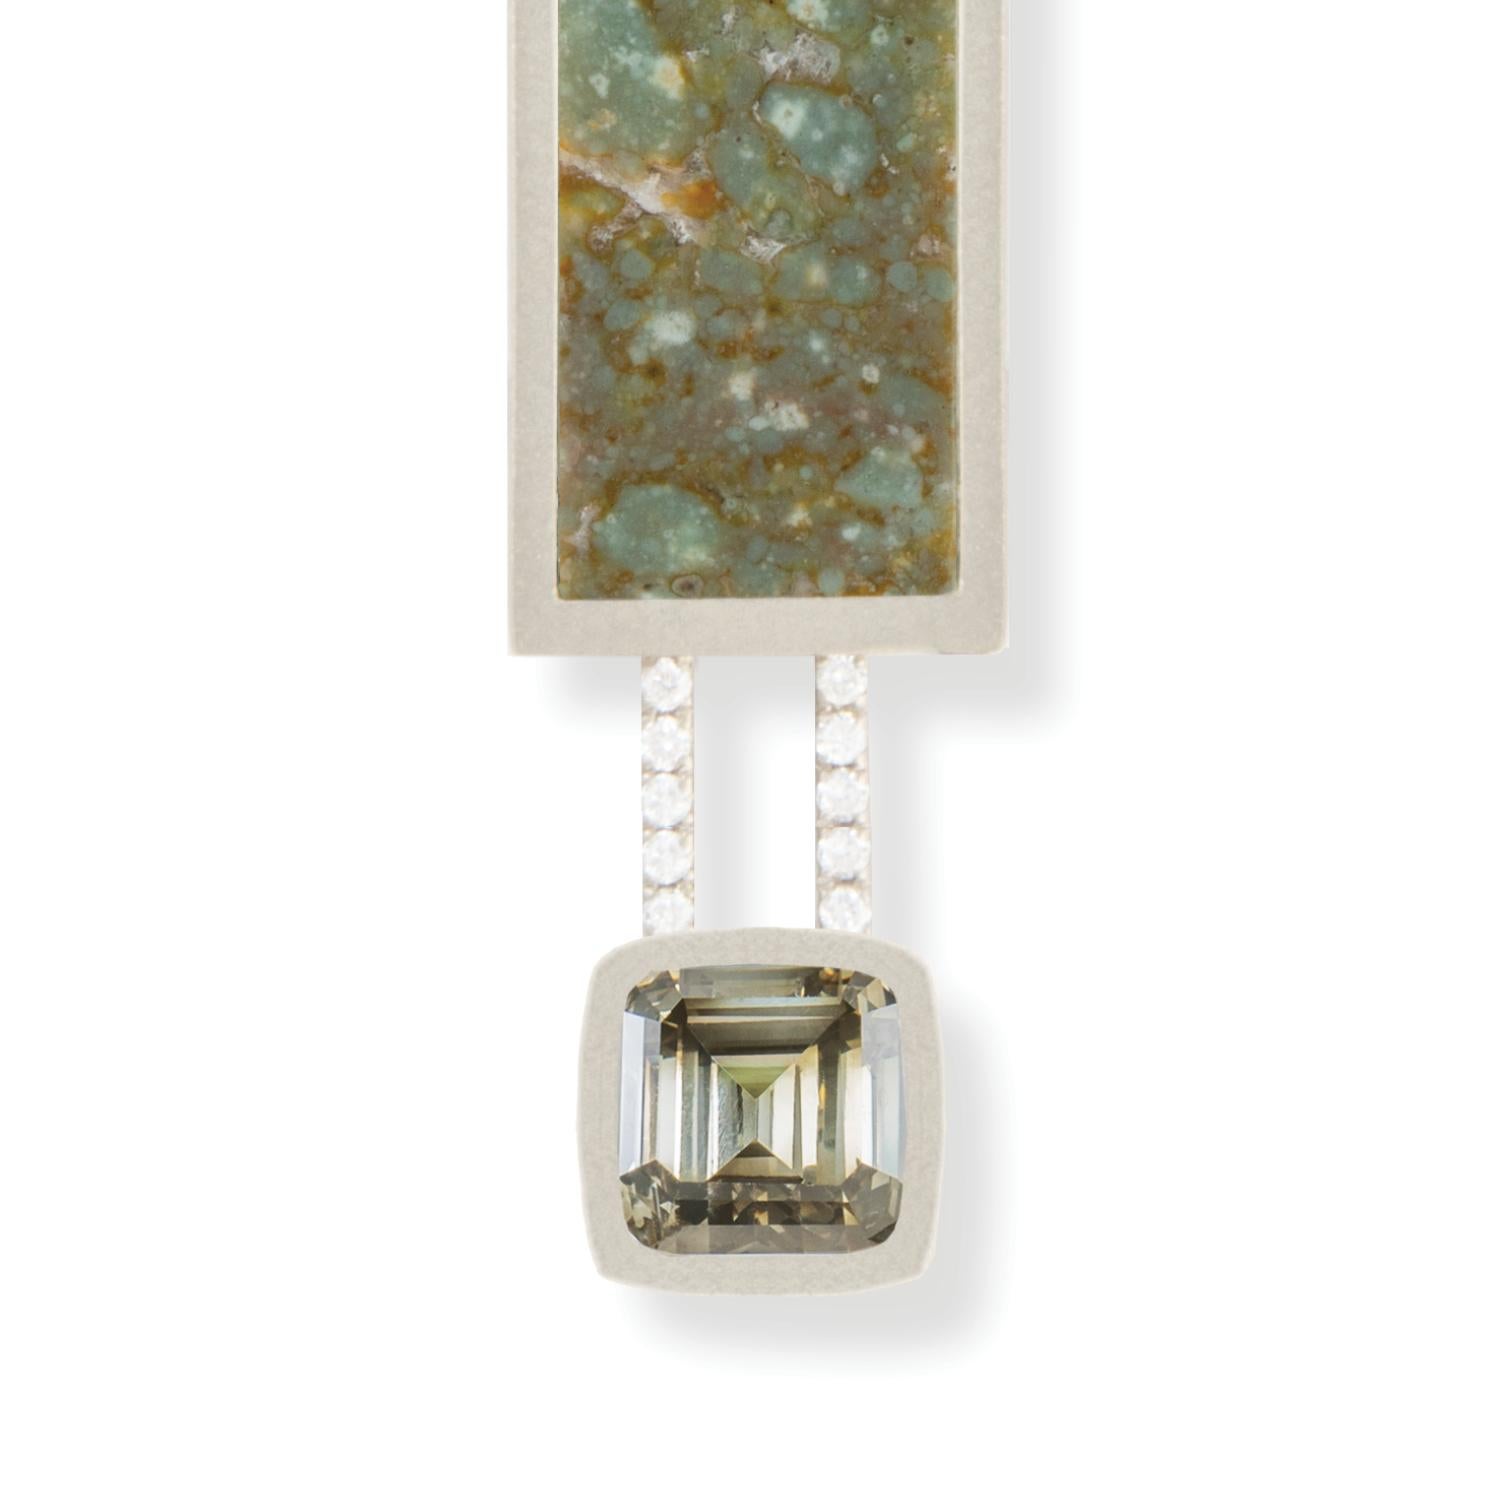 1.20 carat fancy greenish yellow-brown emerald cut diamond and emerald green fossilized dinosaur bone necklace with white diamond baguettes and white diamond pavé, 18 carat recycled white gold  - One-of-a-kind

This is a design concept that can be